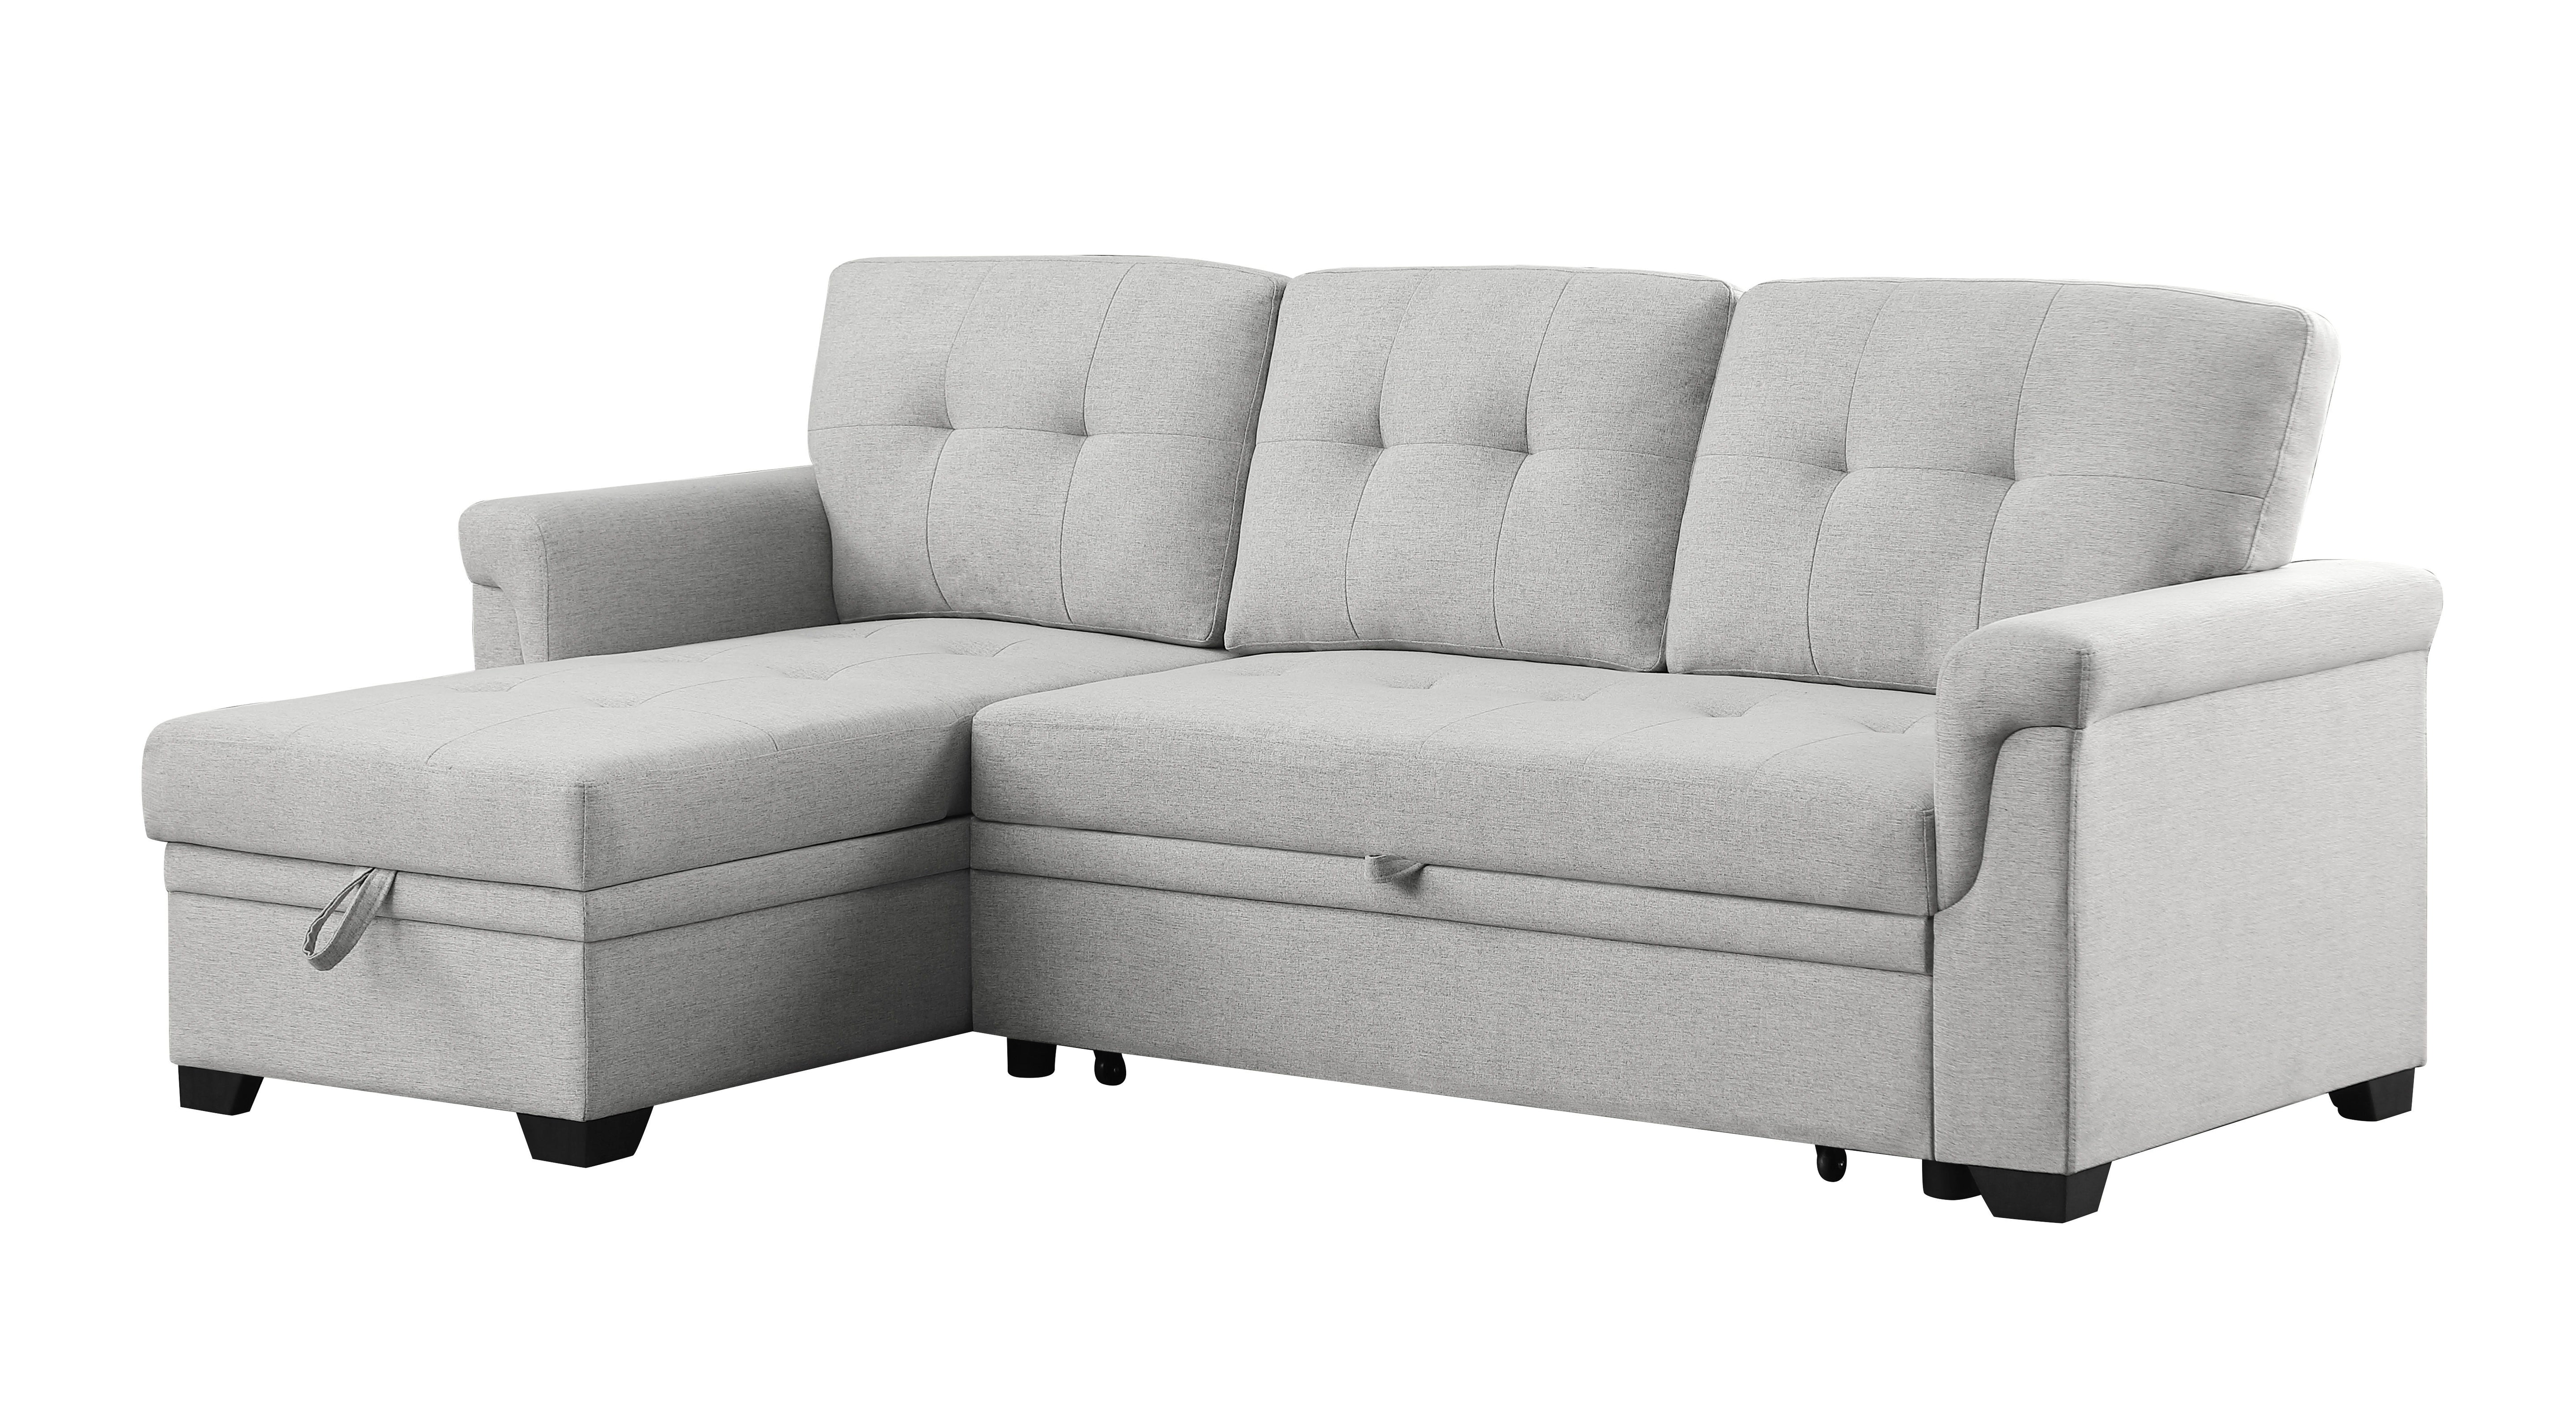 Destiny - Linen Reversible Sleeper Sectional Sofa With Storage Chaise